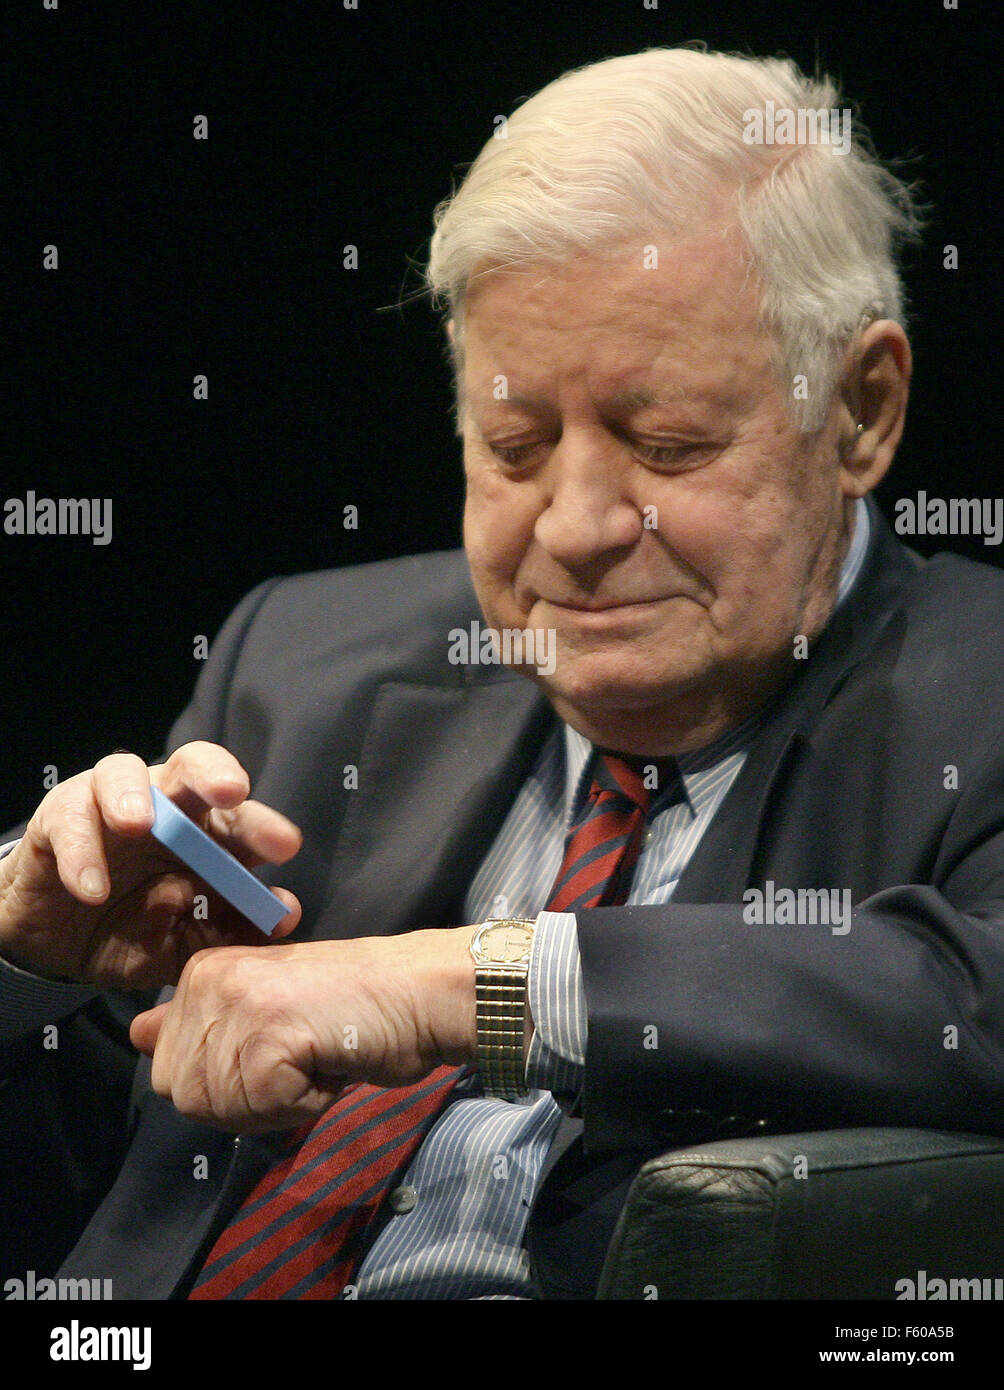 former-chancellor-helmut-schmidt-puts-snuff-tobacco-on-his-hand-during-F60A5B.jpg